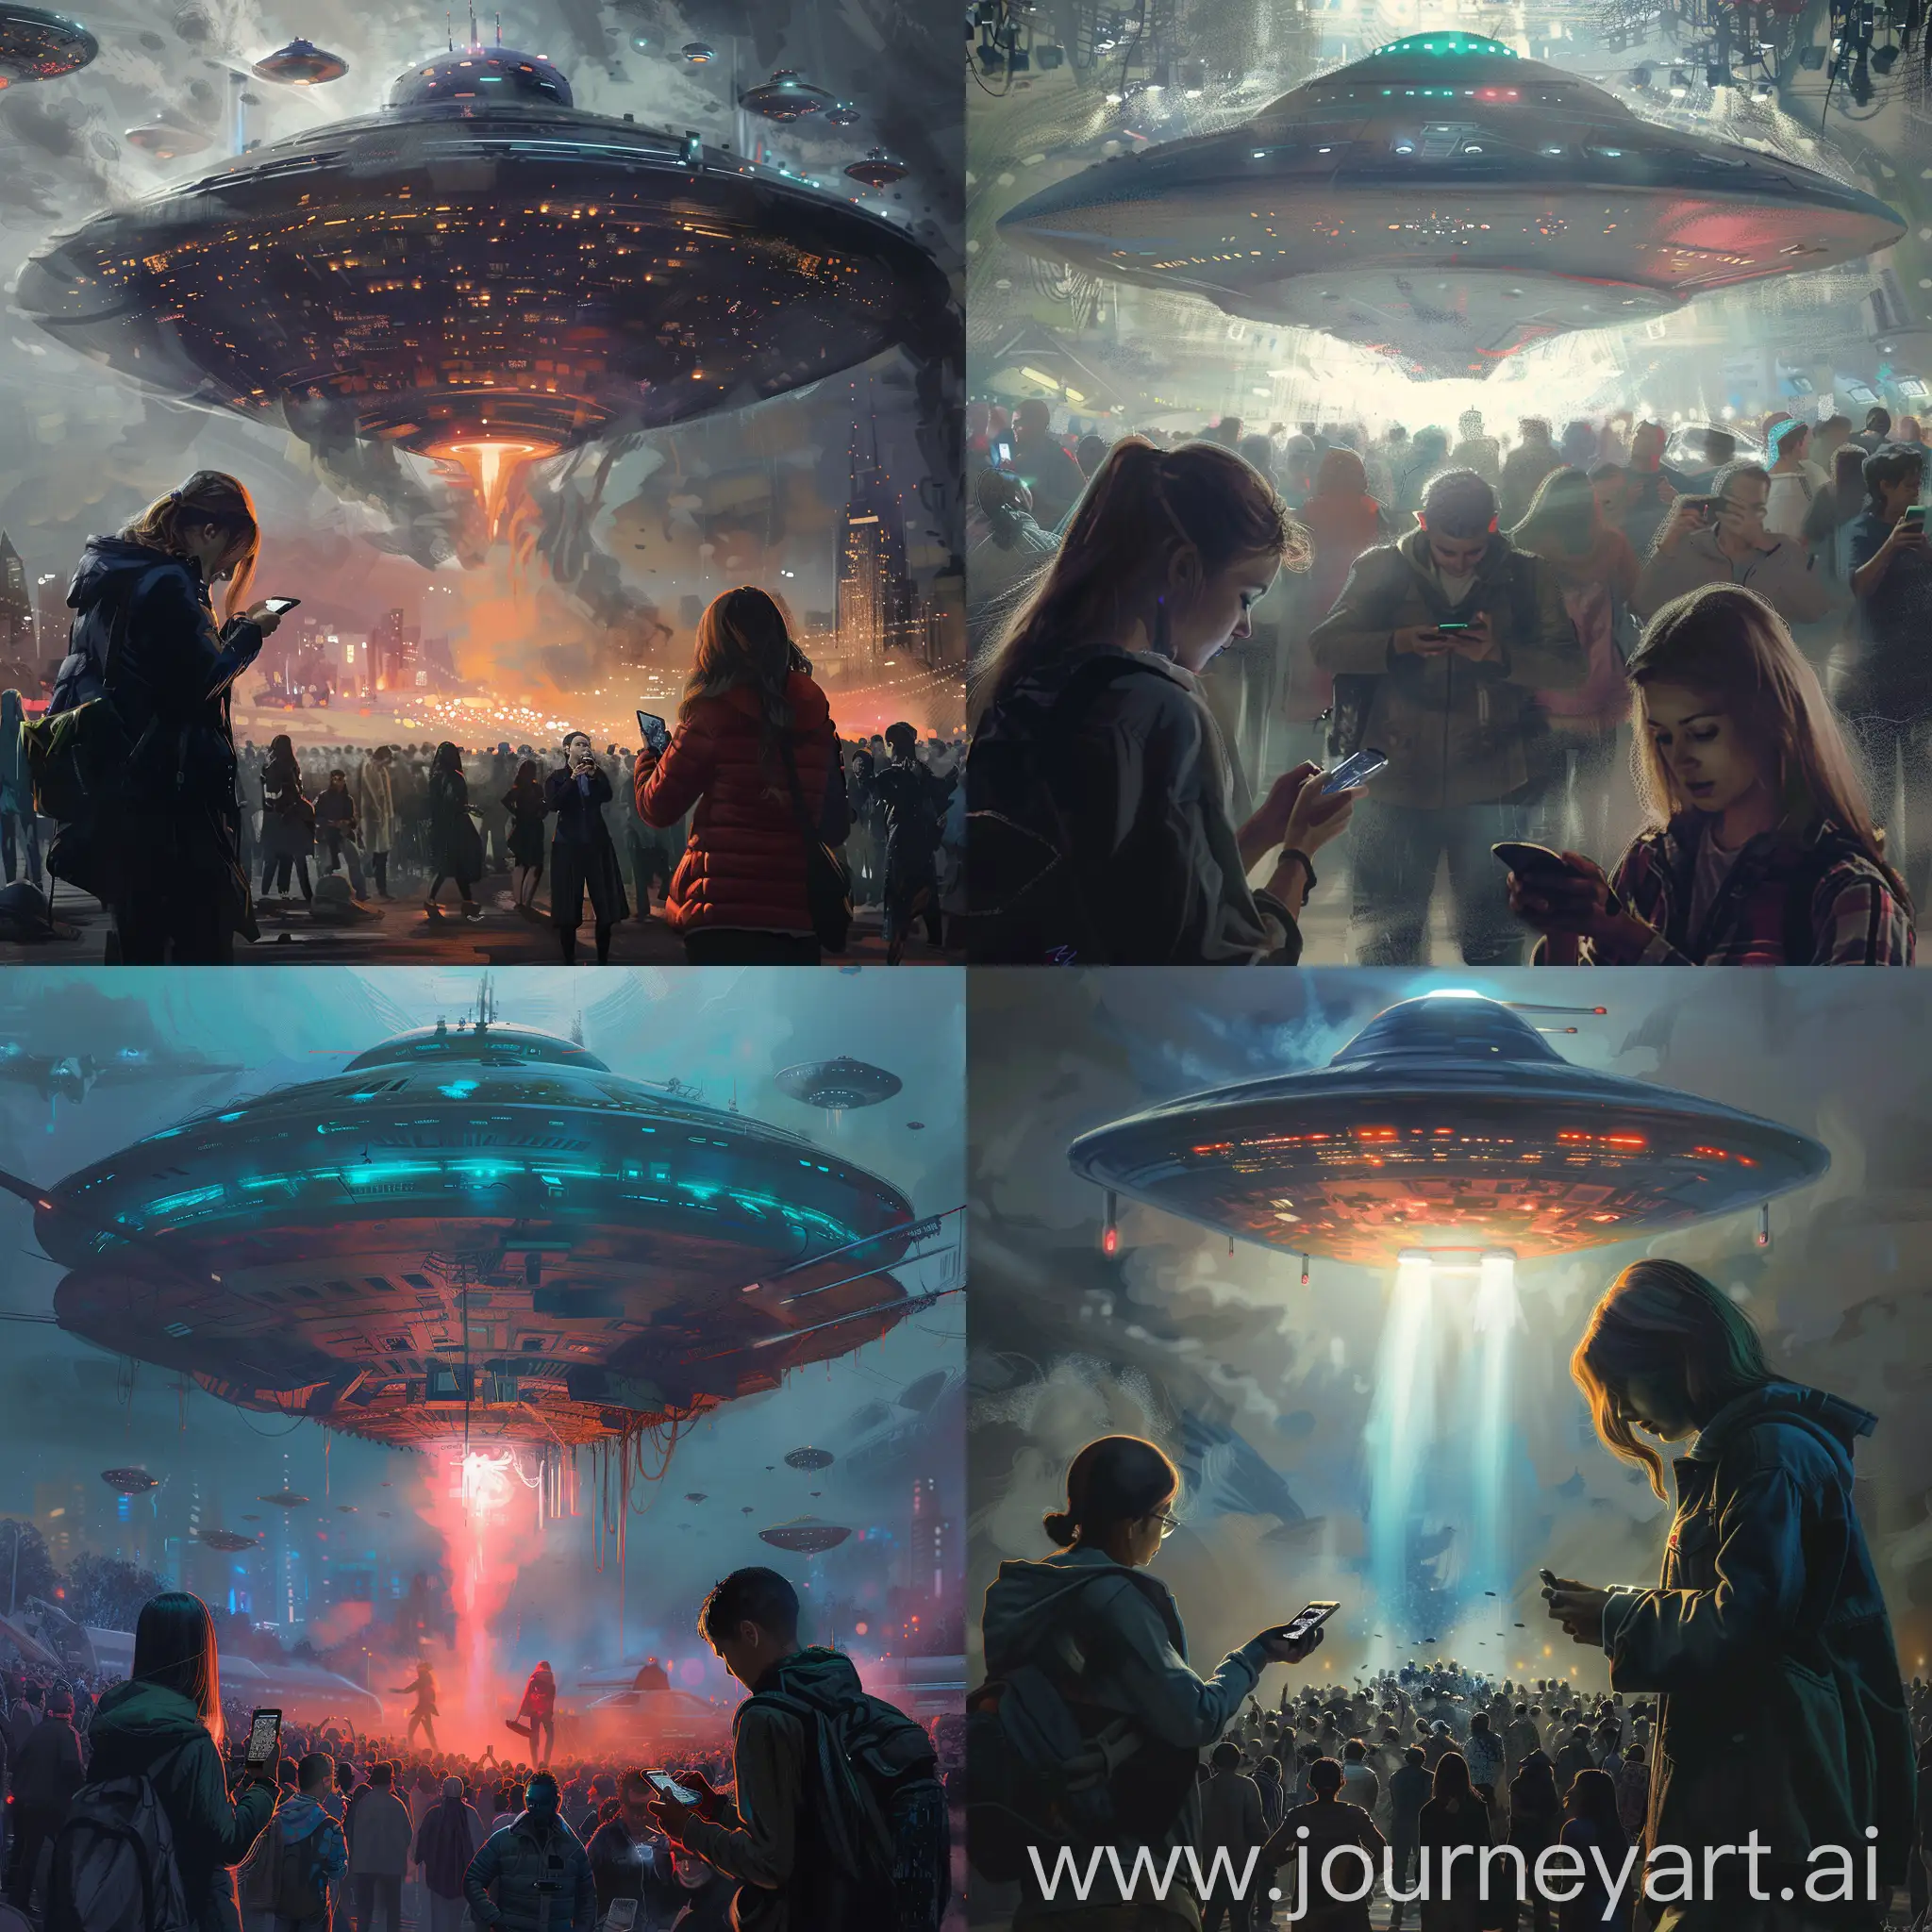 Vibrant-HyperRealistic-Art-Giant-UFO-Captivates-Crowds-with-PhoneDistracted-Duo-in-Foreground